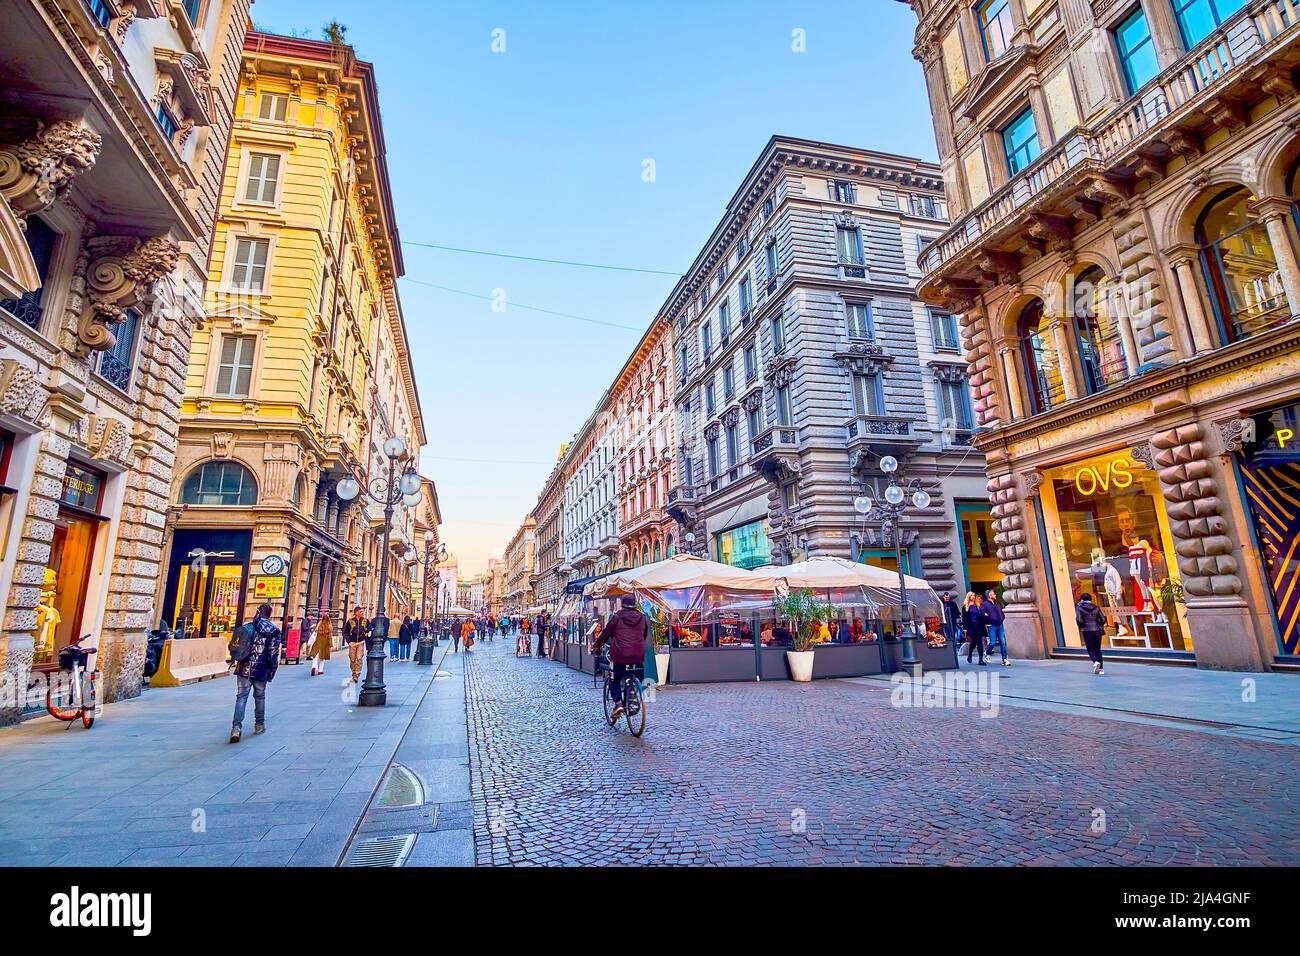 MILAN, ITALY - APRIL 5, 2022: Walk along Via Dante, one of the popular shopping areas of the city, on April 5 in Milan, Italy Stock Photo